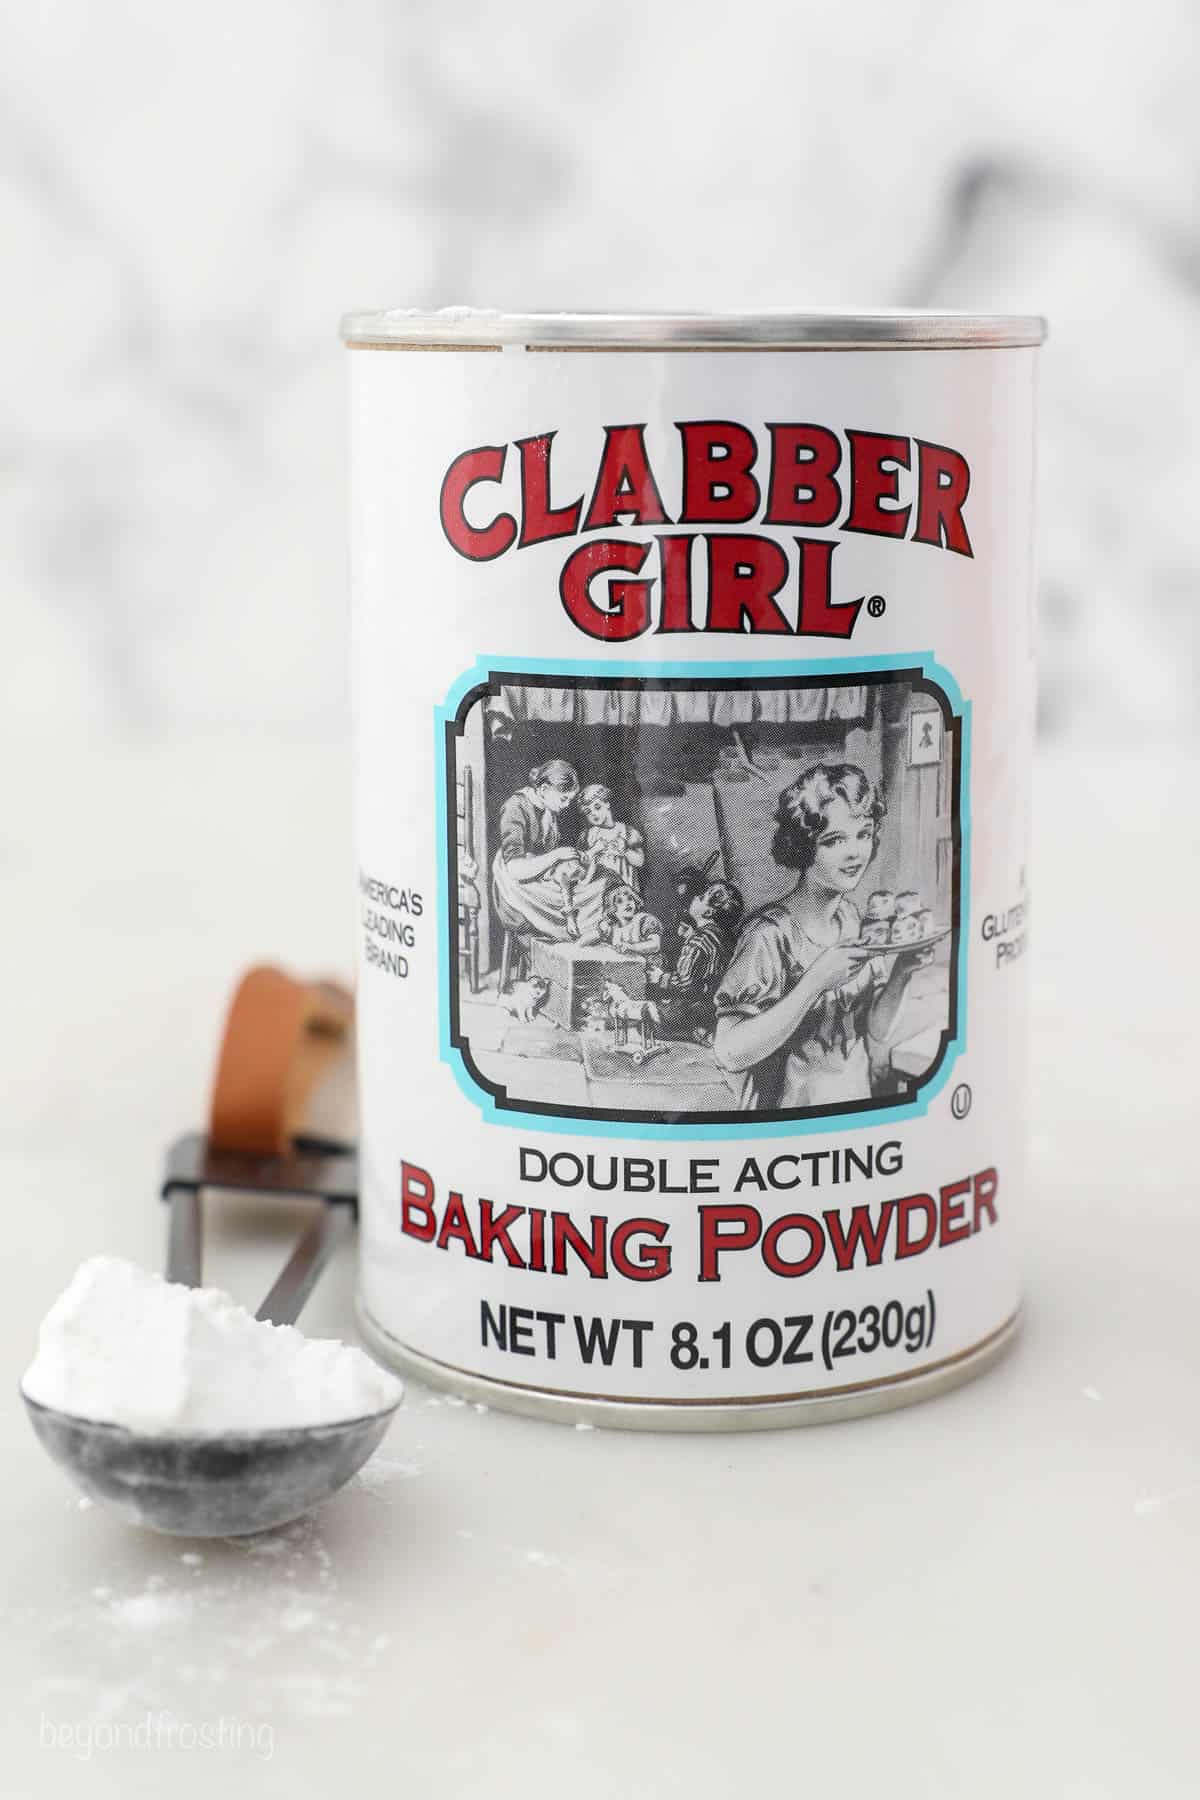 A can of double acting baking powder beside a measuring spoon holding more baking powder